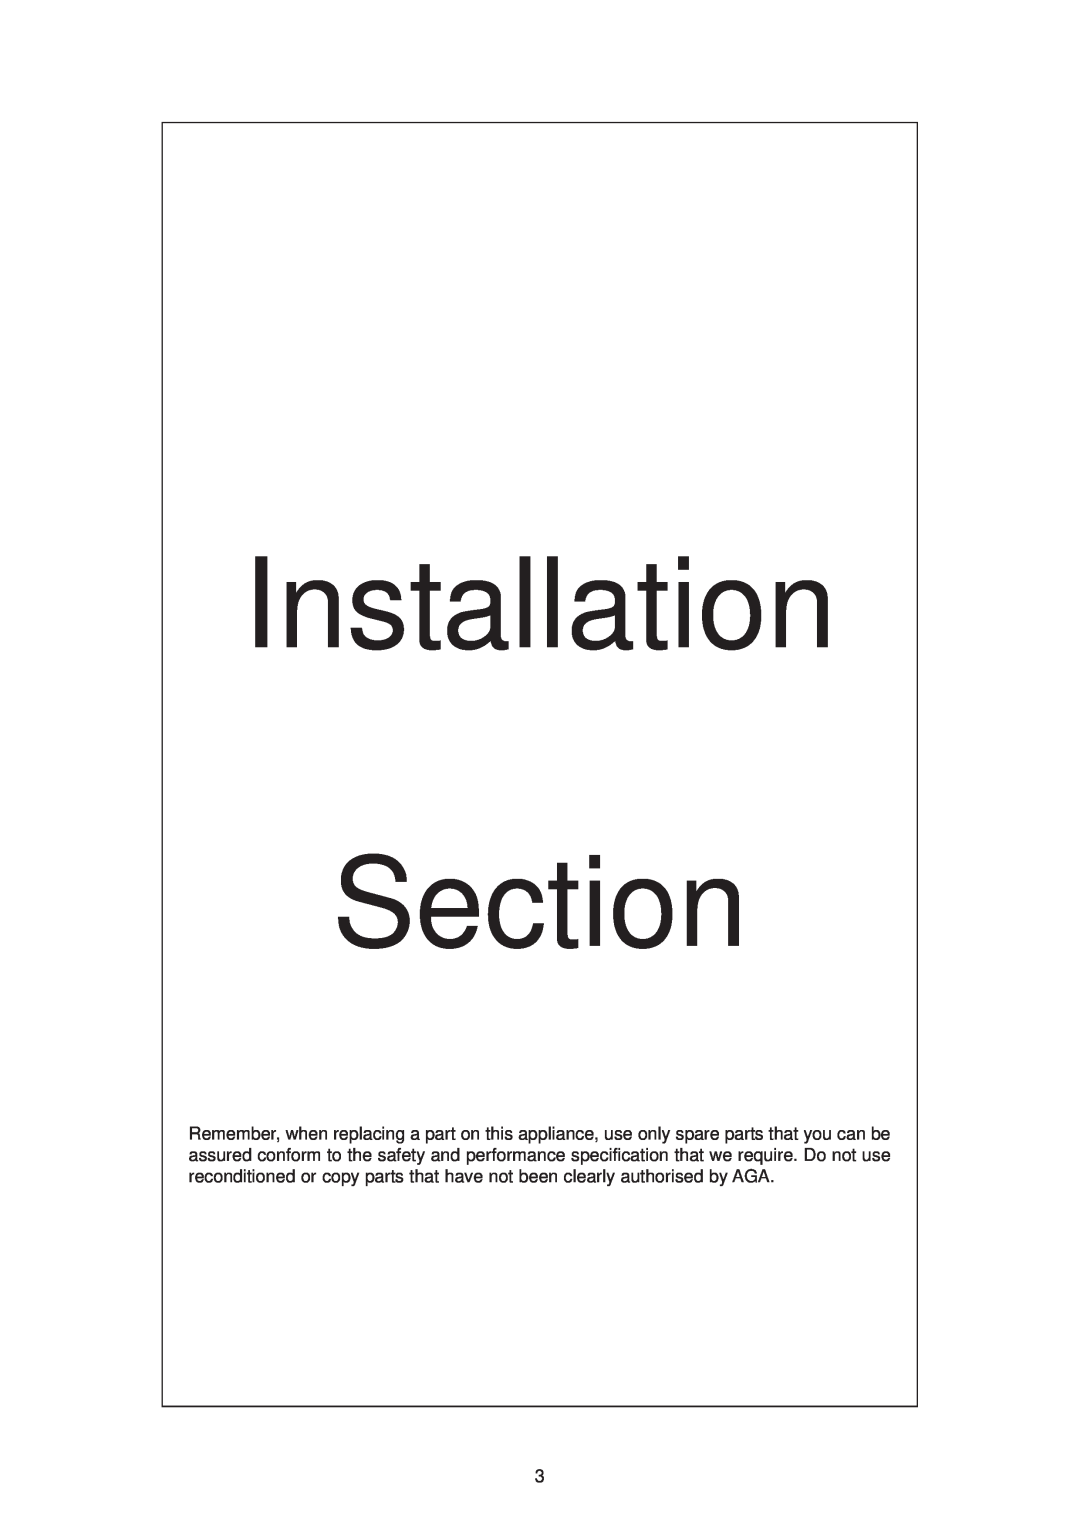 Aga Ranges dc6 owner manual Installation Section 